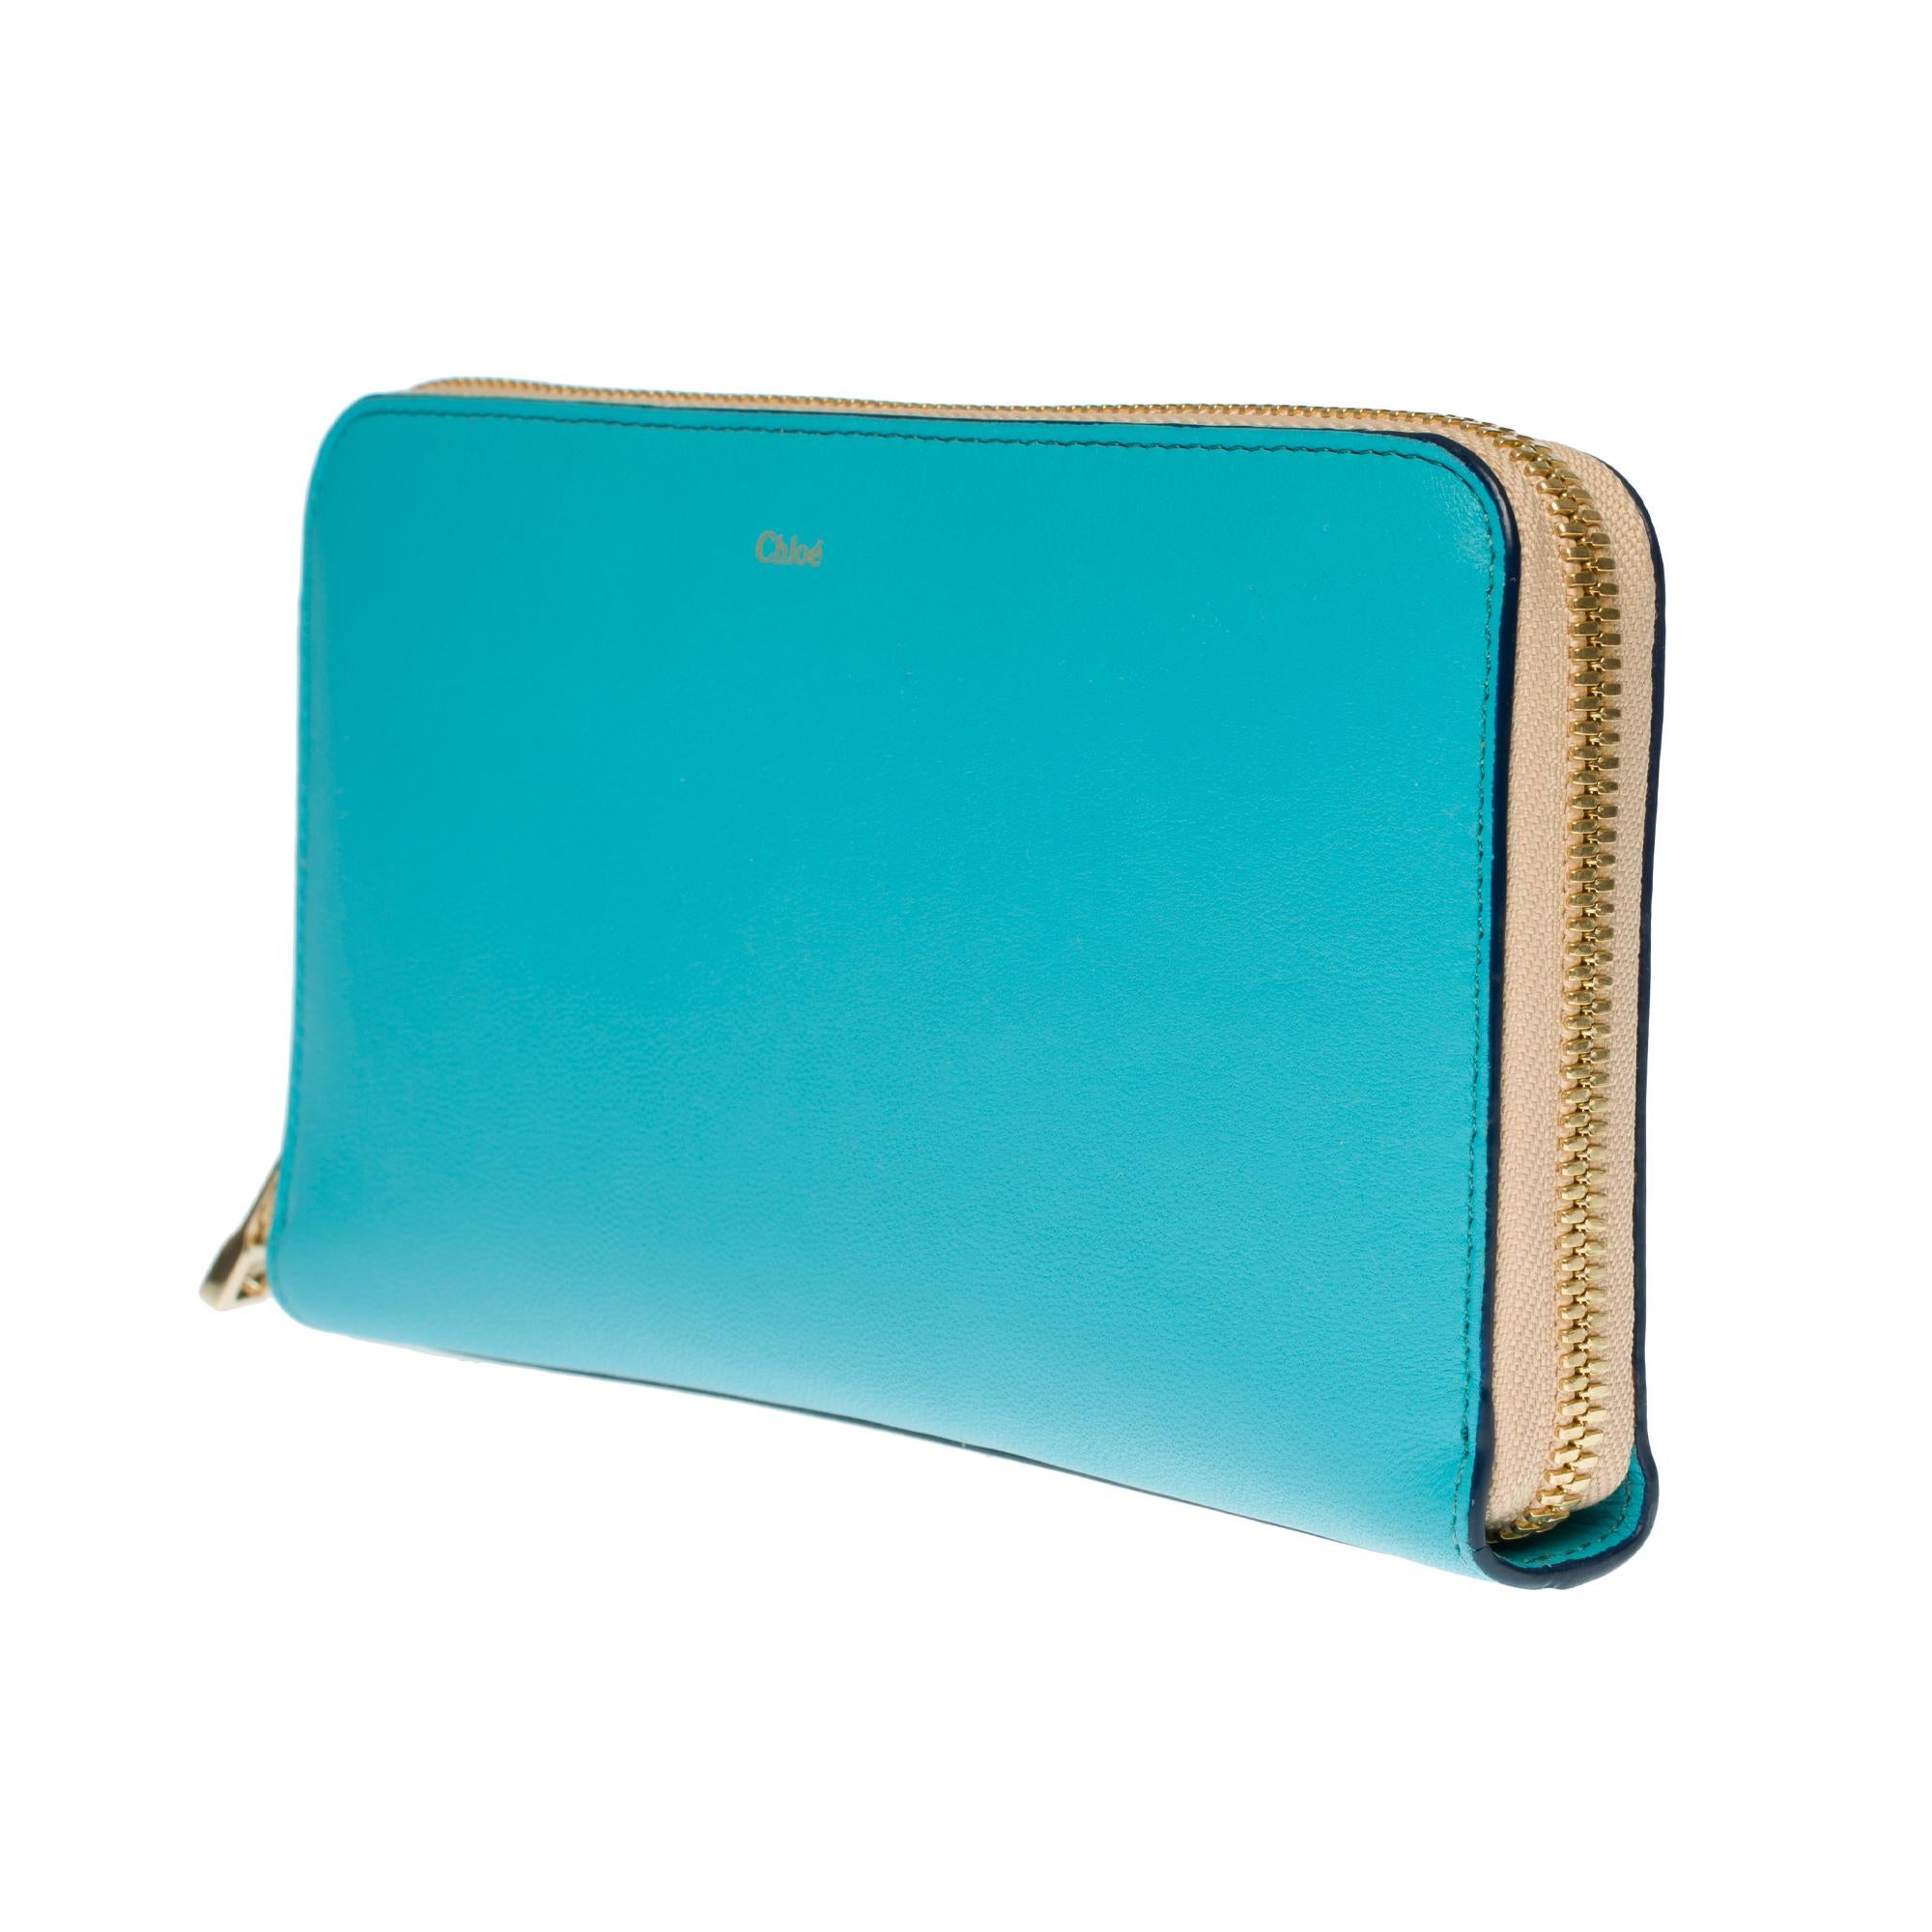 Gray Charming Chloé bicolor wallet in turquoise and black leather with gold hardware